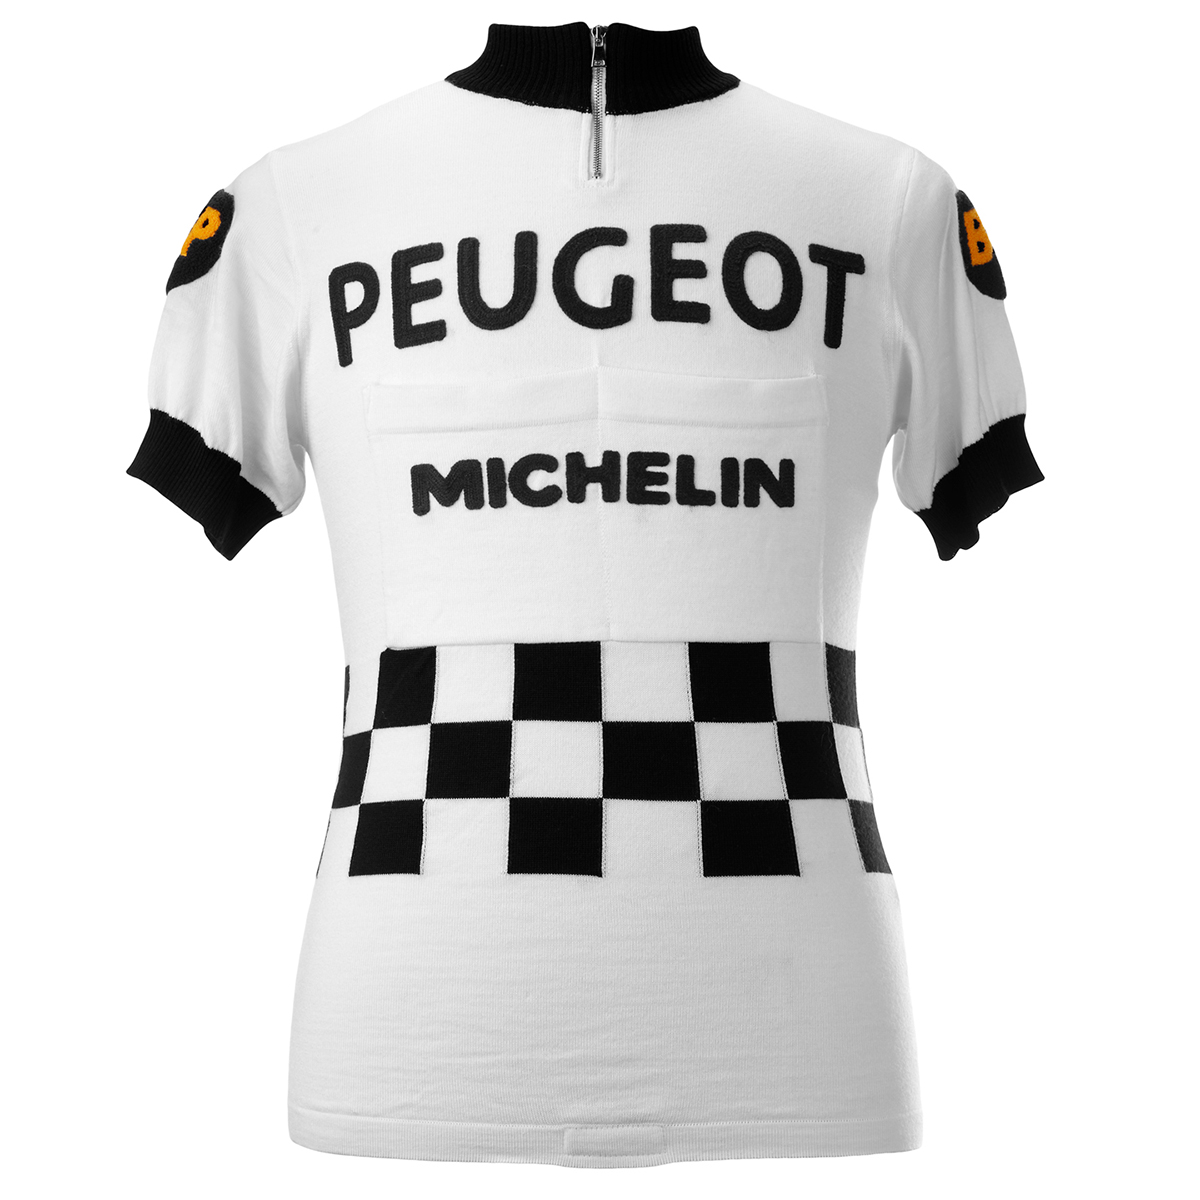 Details about  / Classic Retro Vintage Mens Peugeot Michelin Cycling Jersey Size M-XL UK Seller